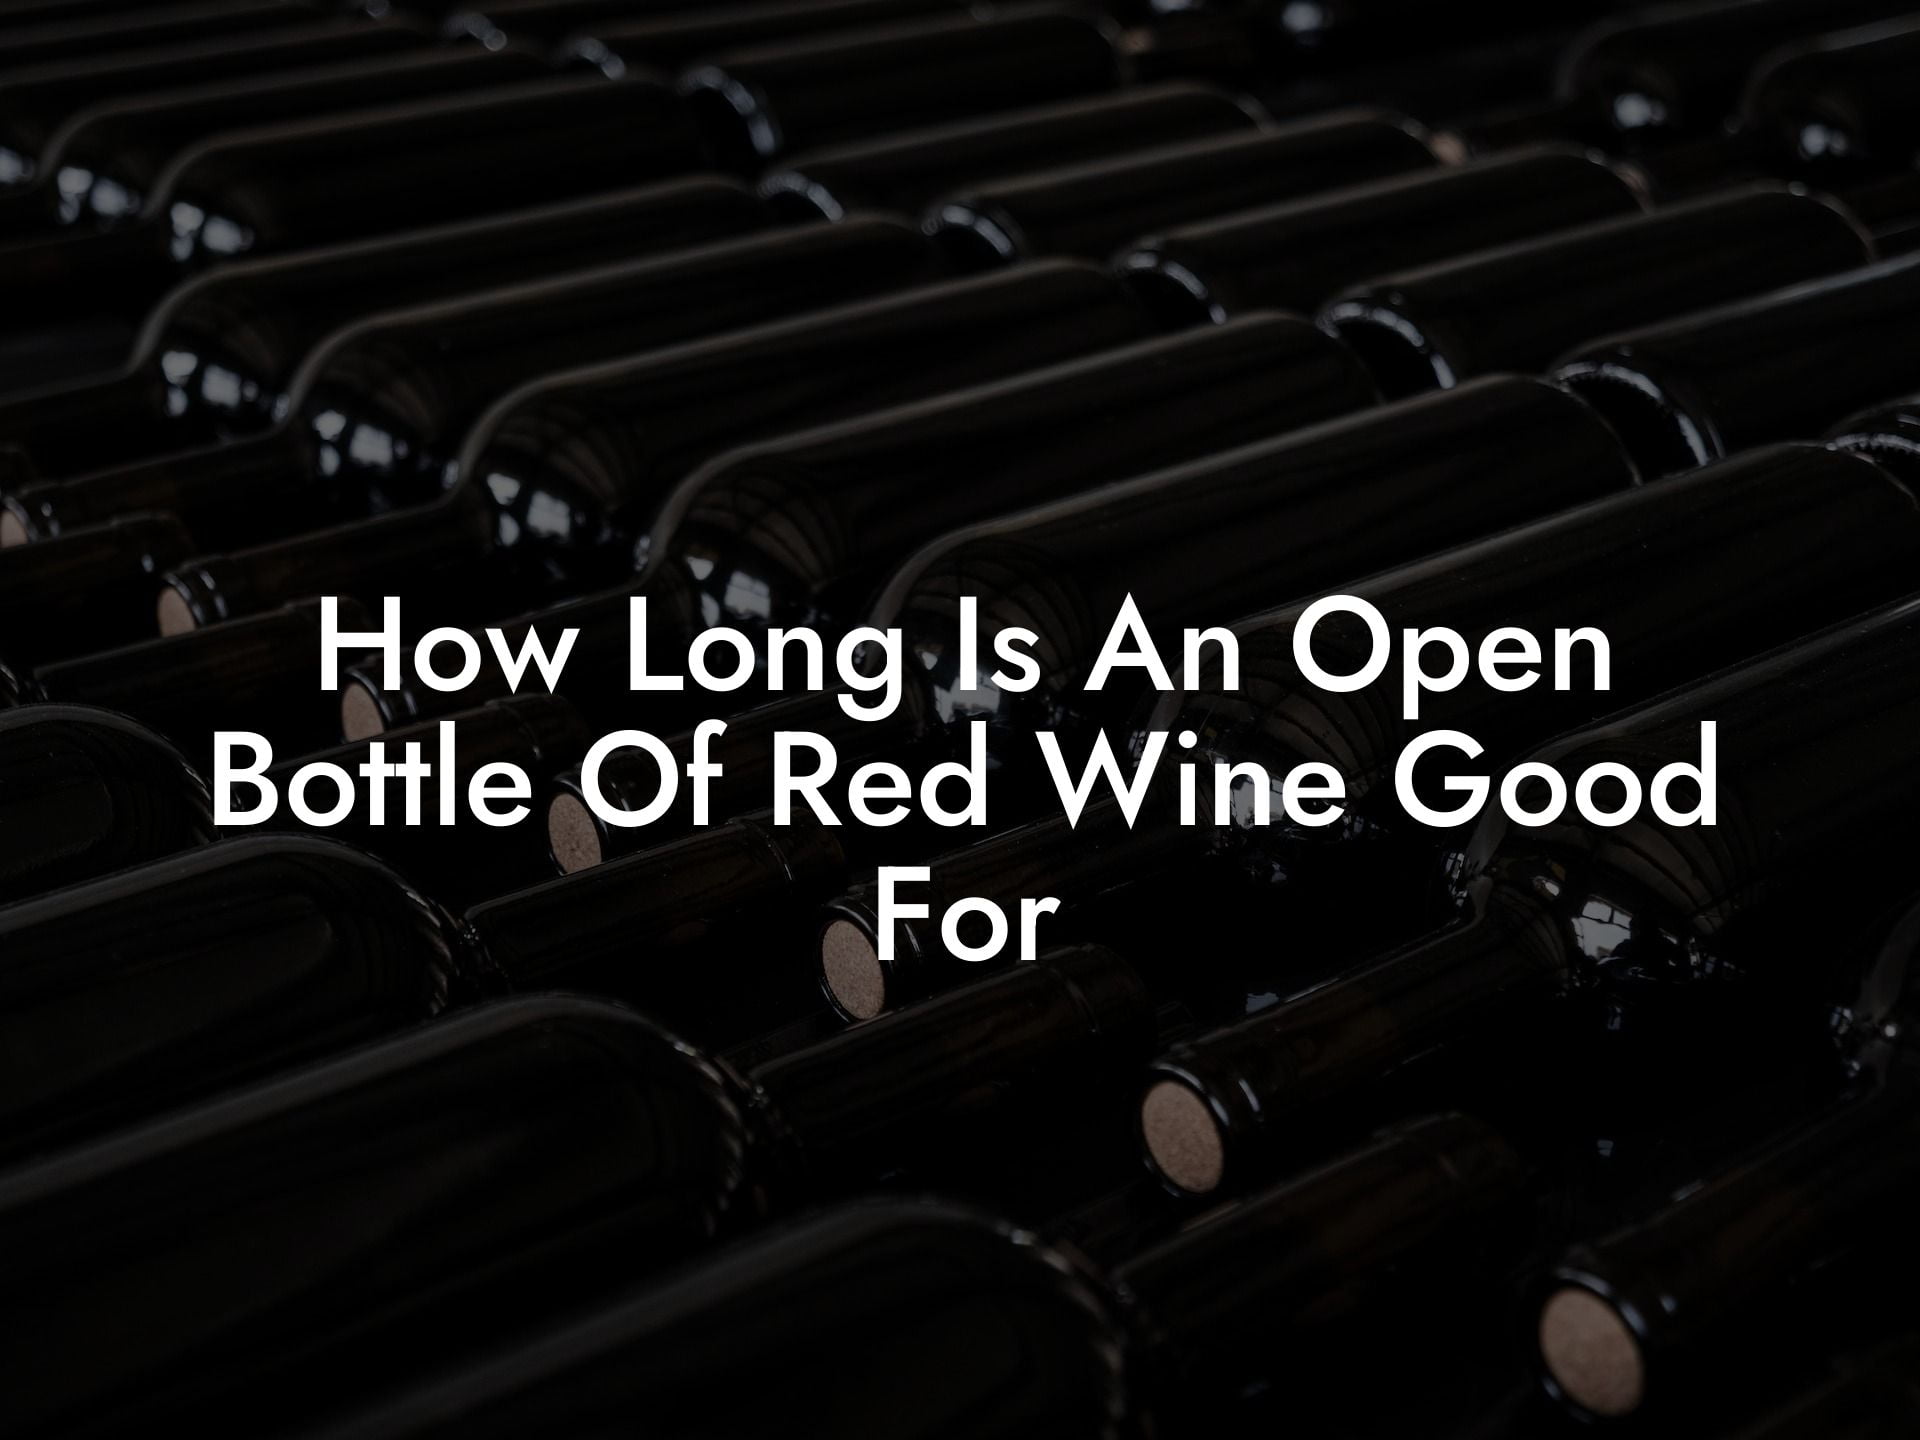 How Long Is An Open Bottle Of Red Wine Good For